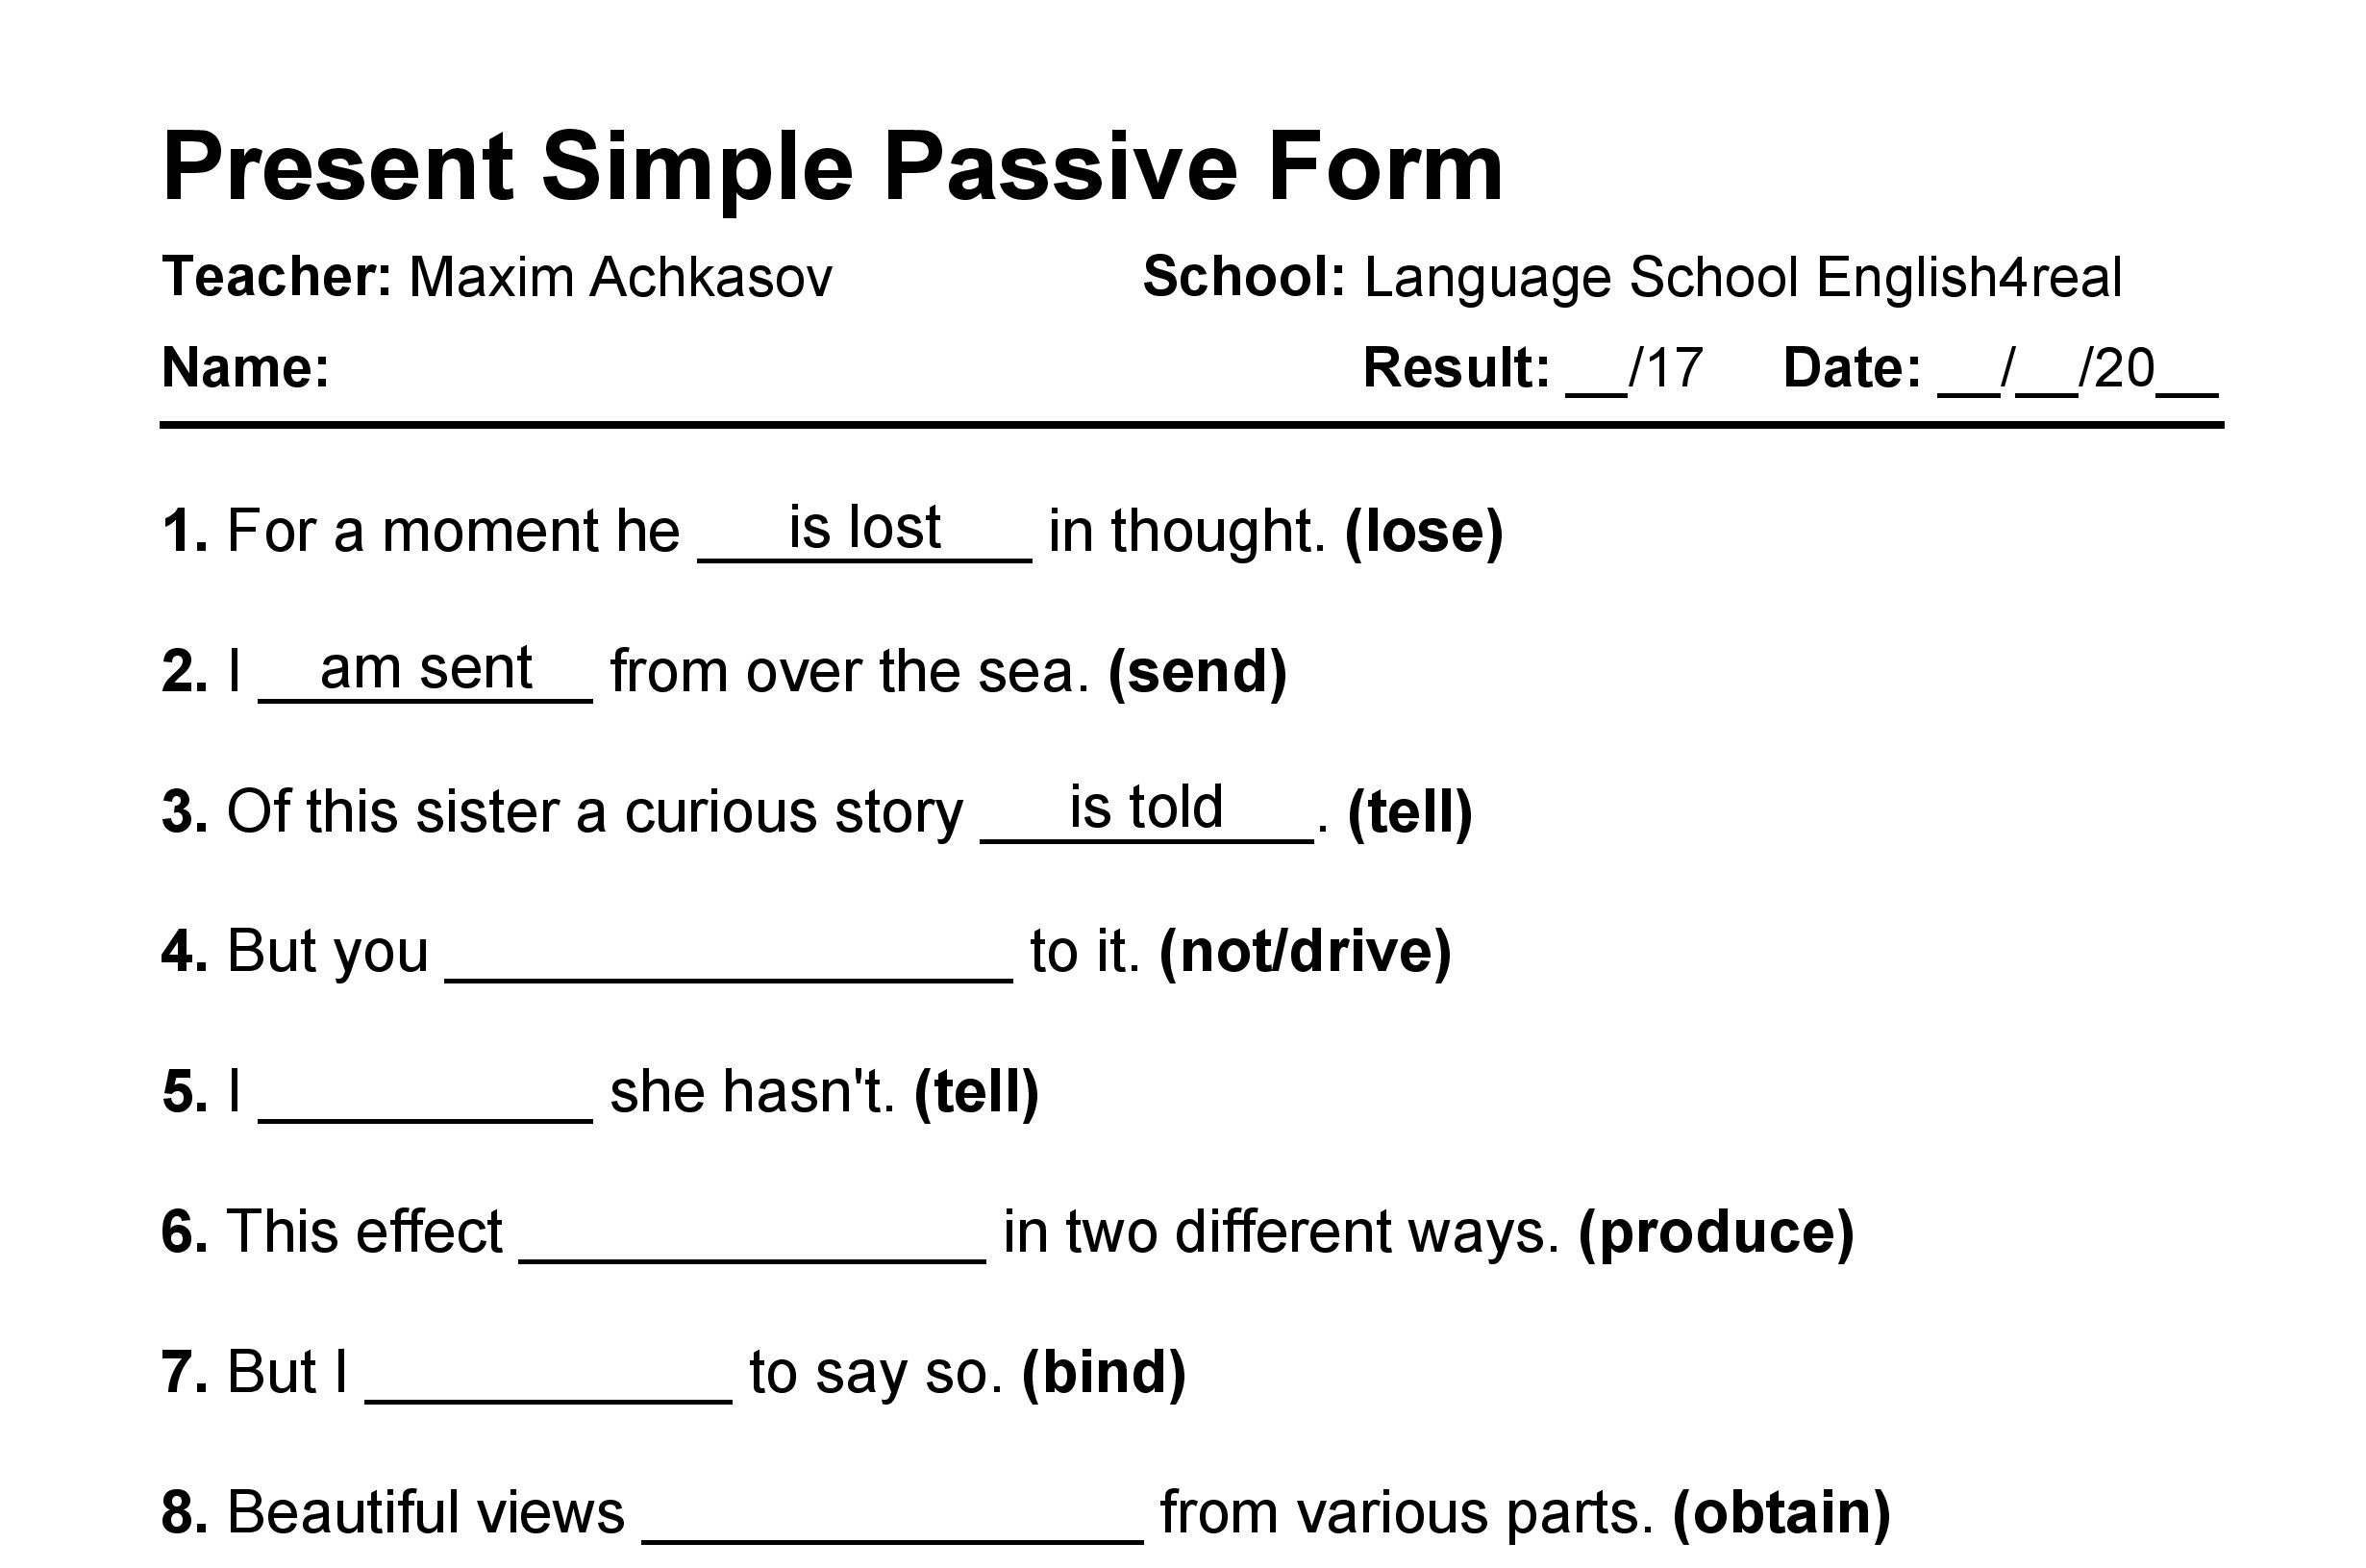 Present Simple Passive English Grammar Fill In The Blanks Exercises With Answers In PDF